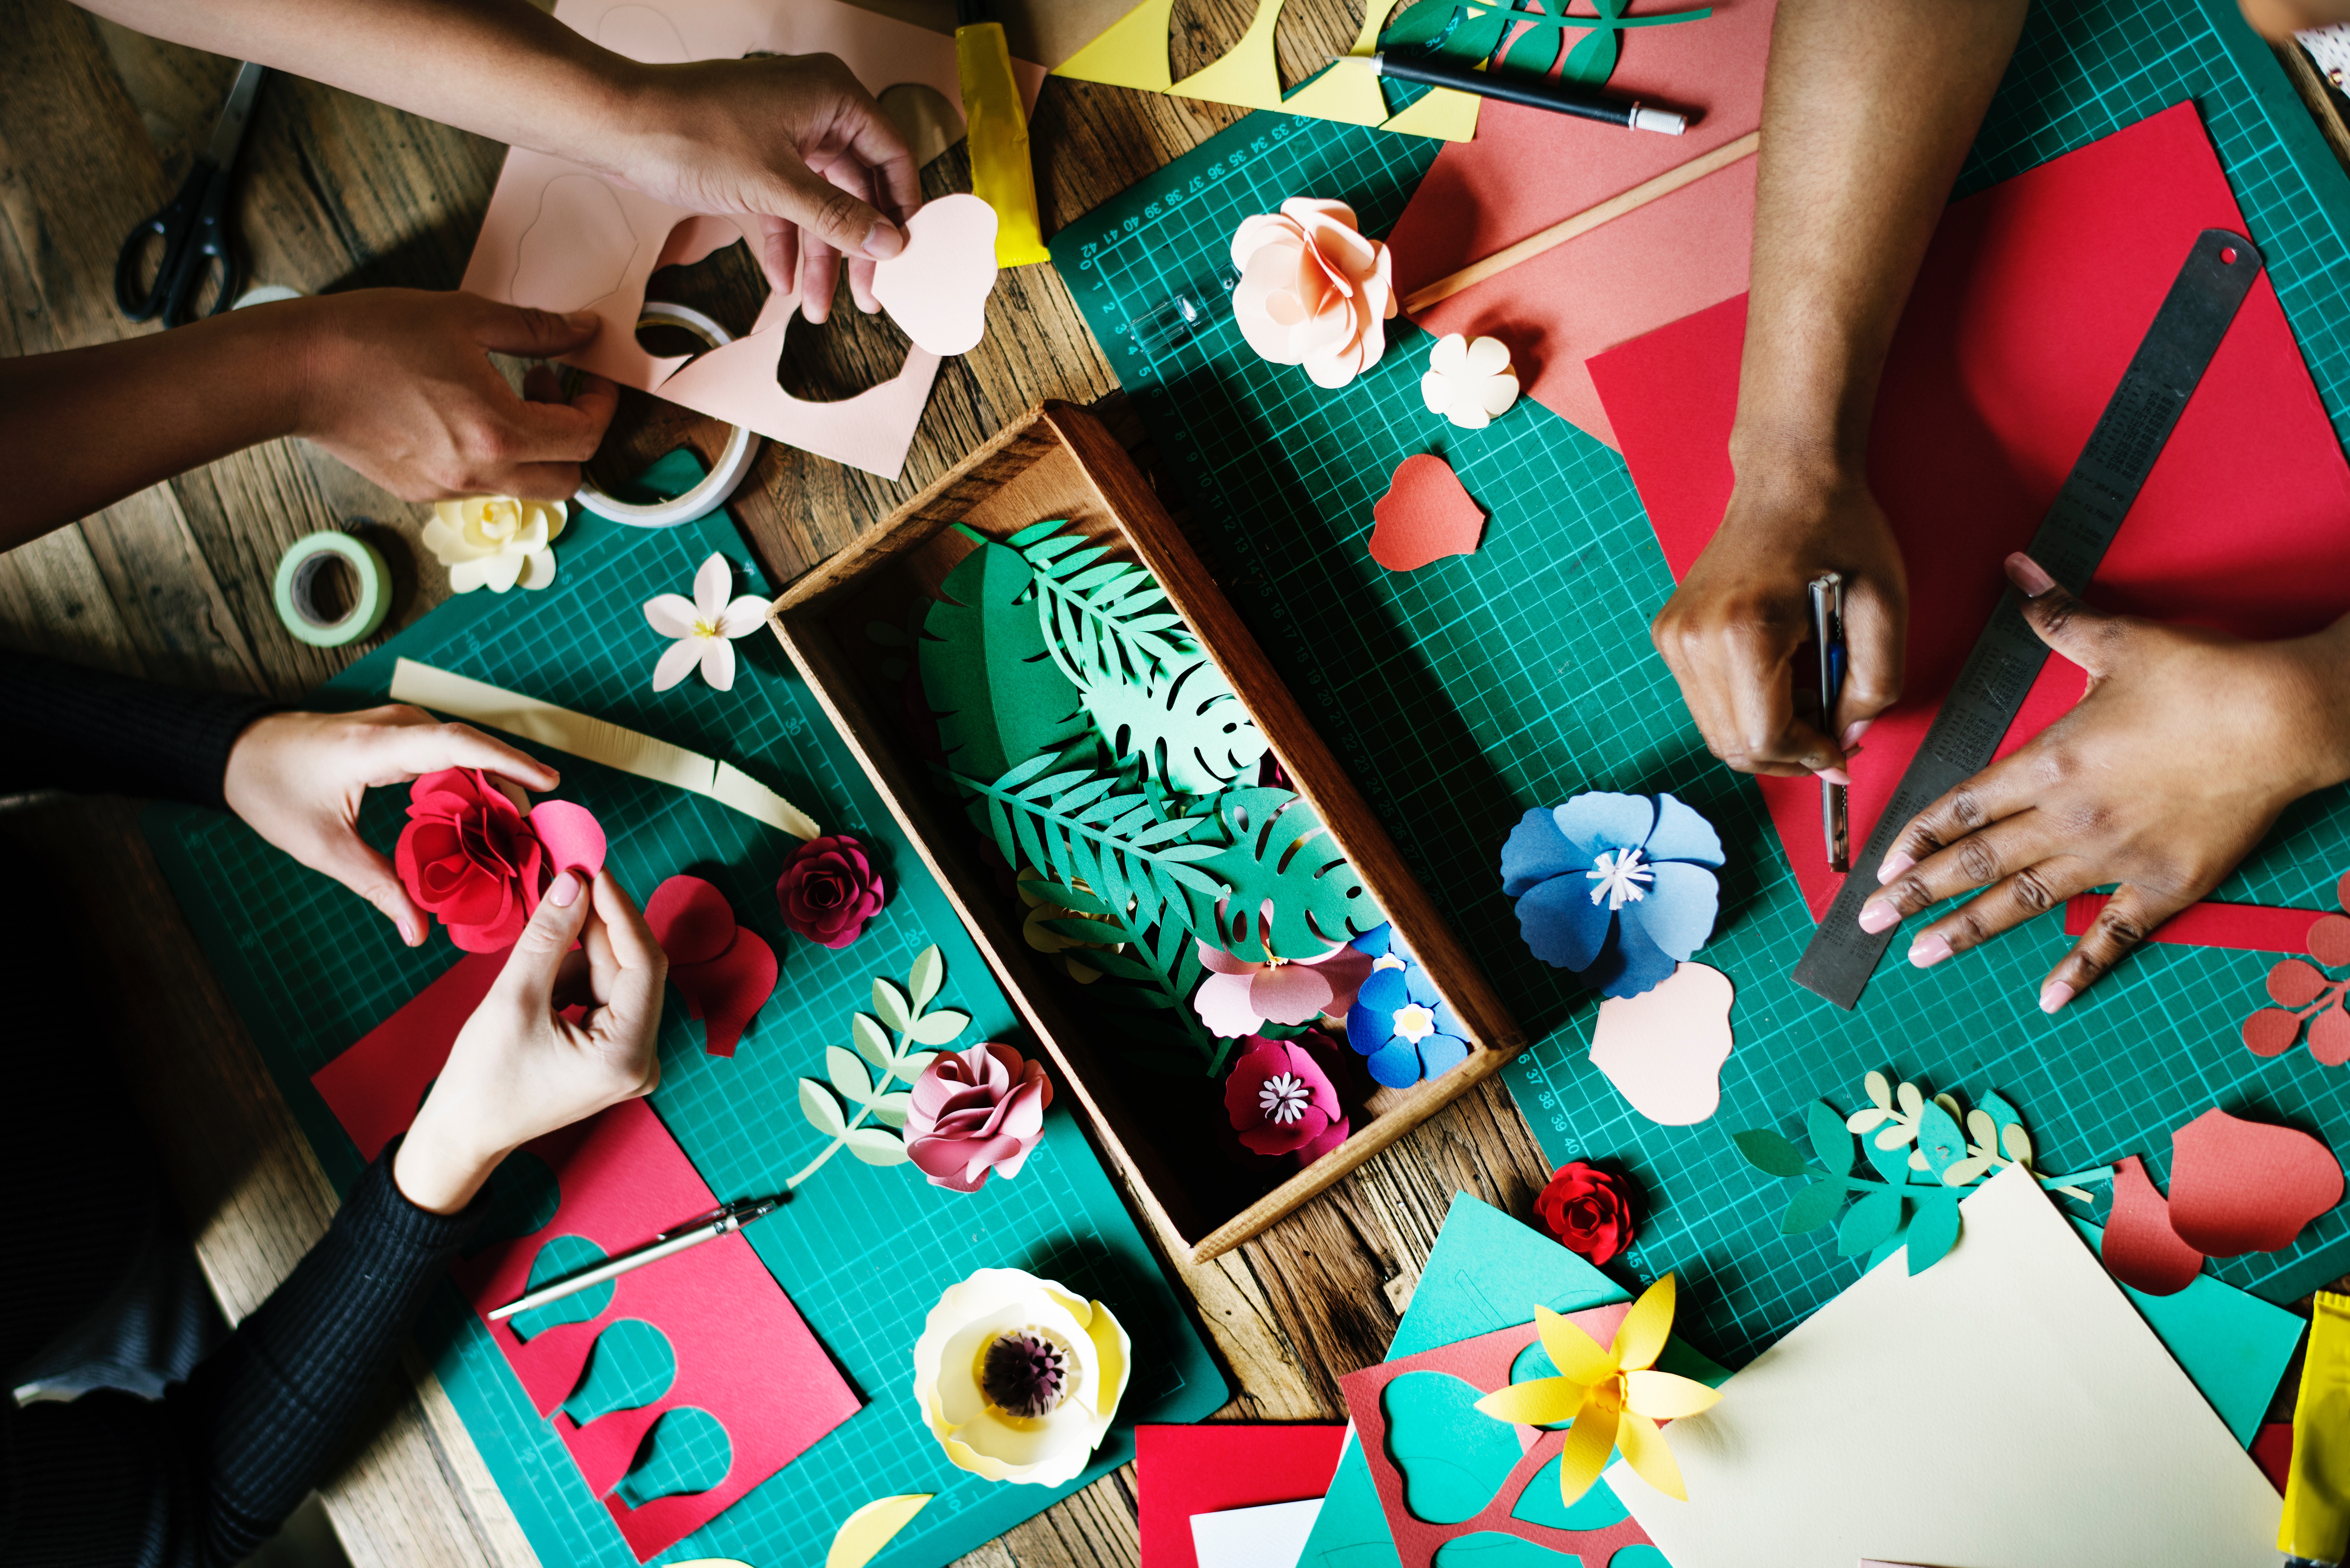 An overhead view of productive downtime by making crafts 